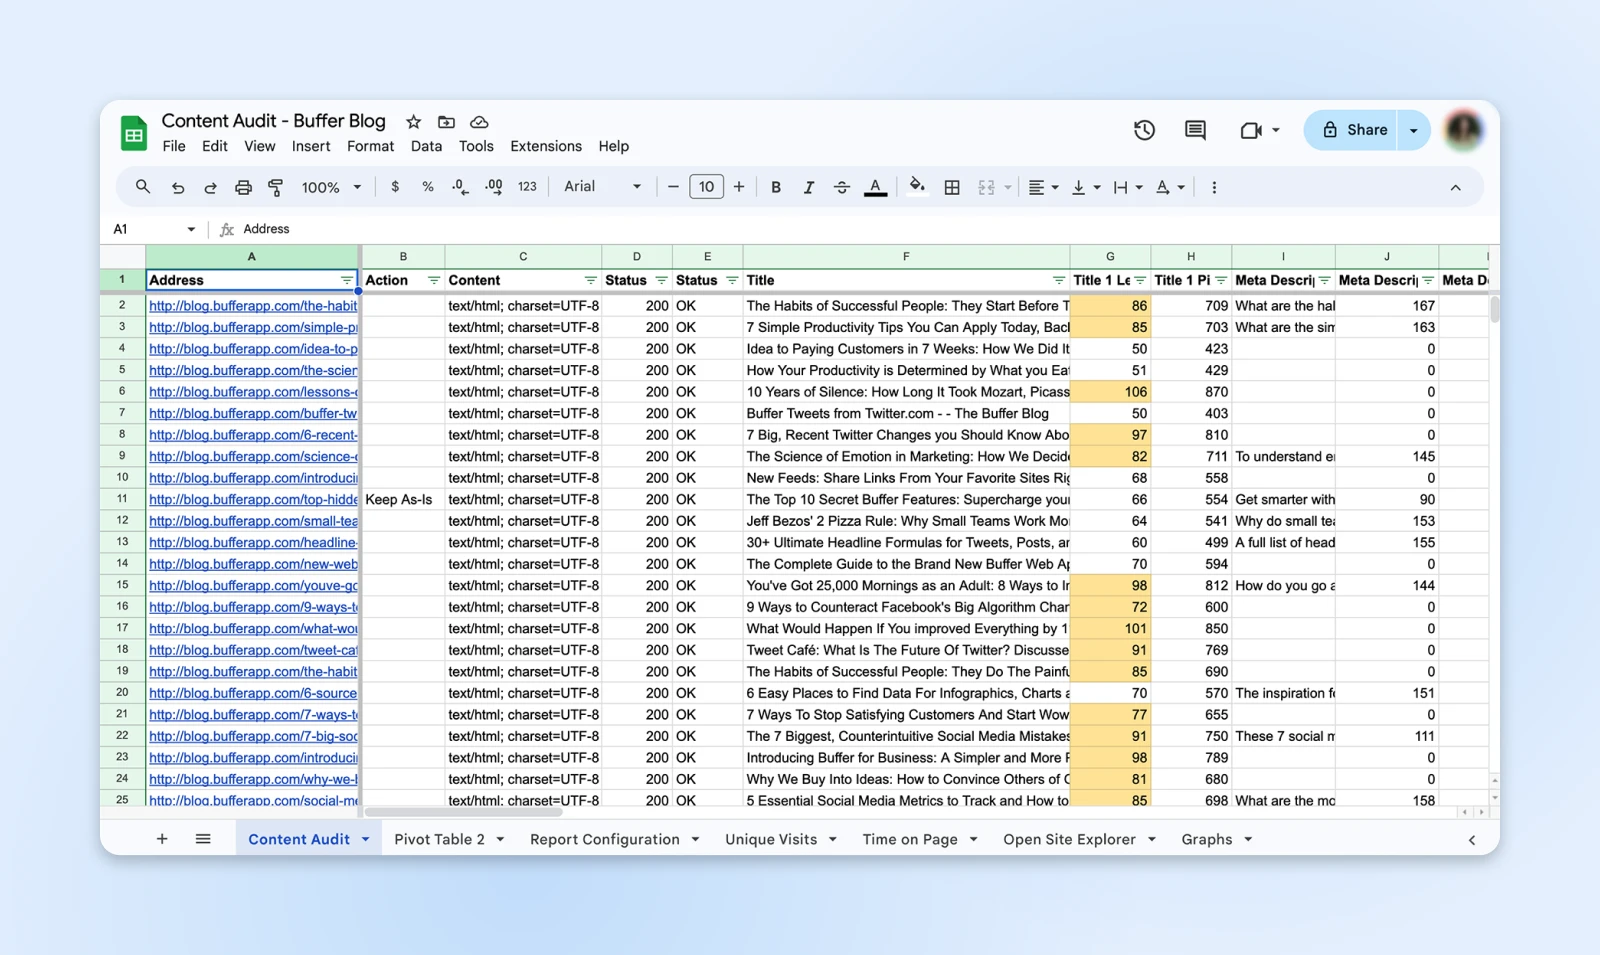 Sample spreadsheet screenshot with data for a content audit for the Buffer blog.